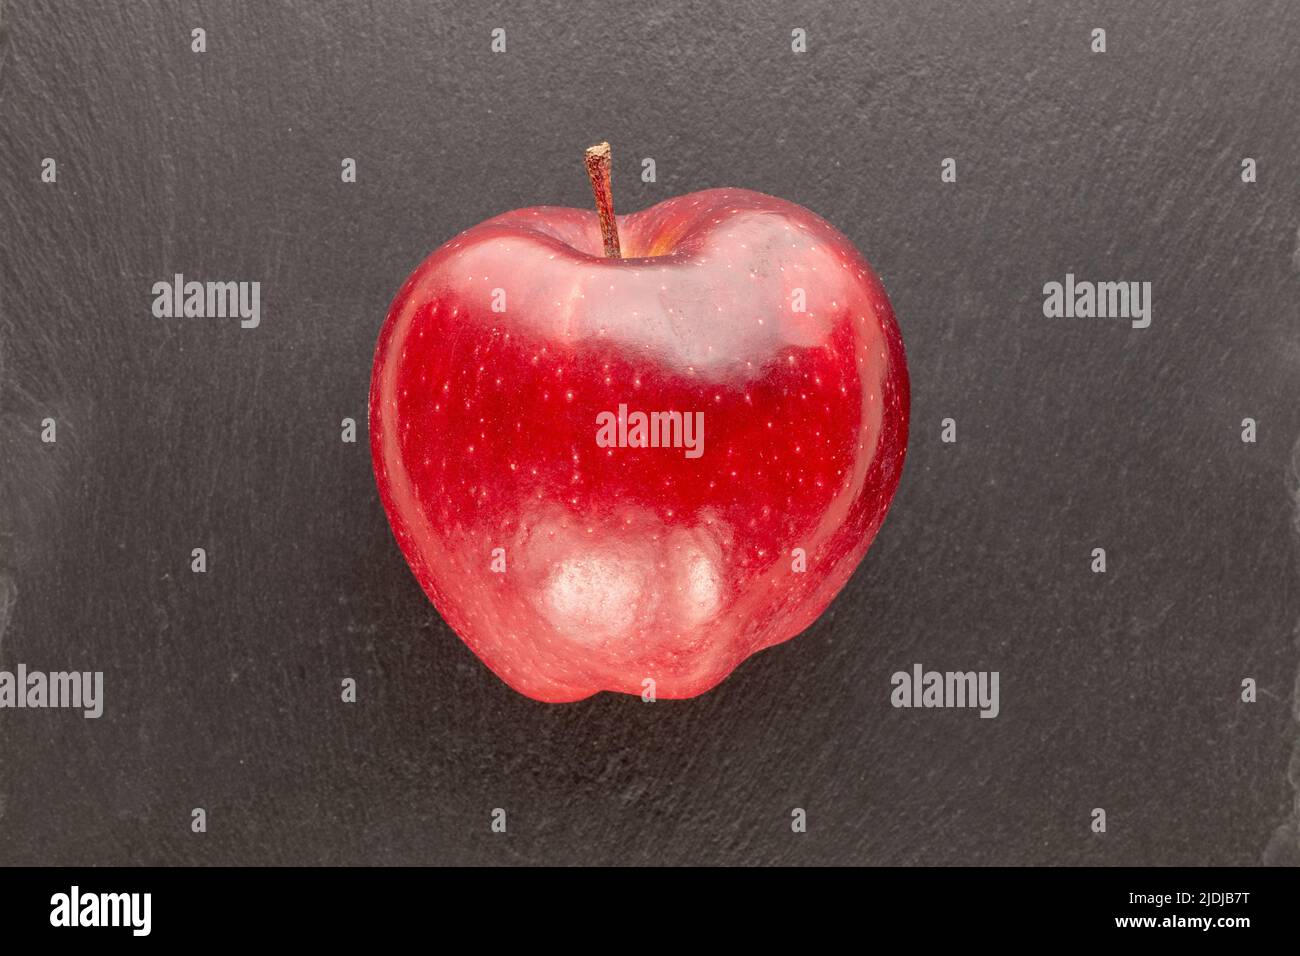 One ripe red apple on a slate stone, close-up, top view. Stock Photo